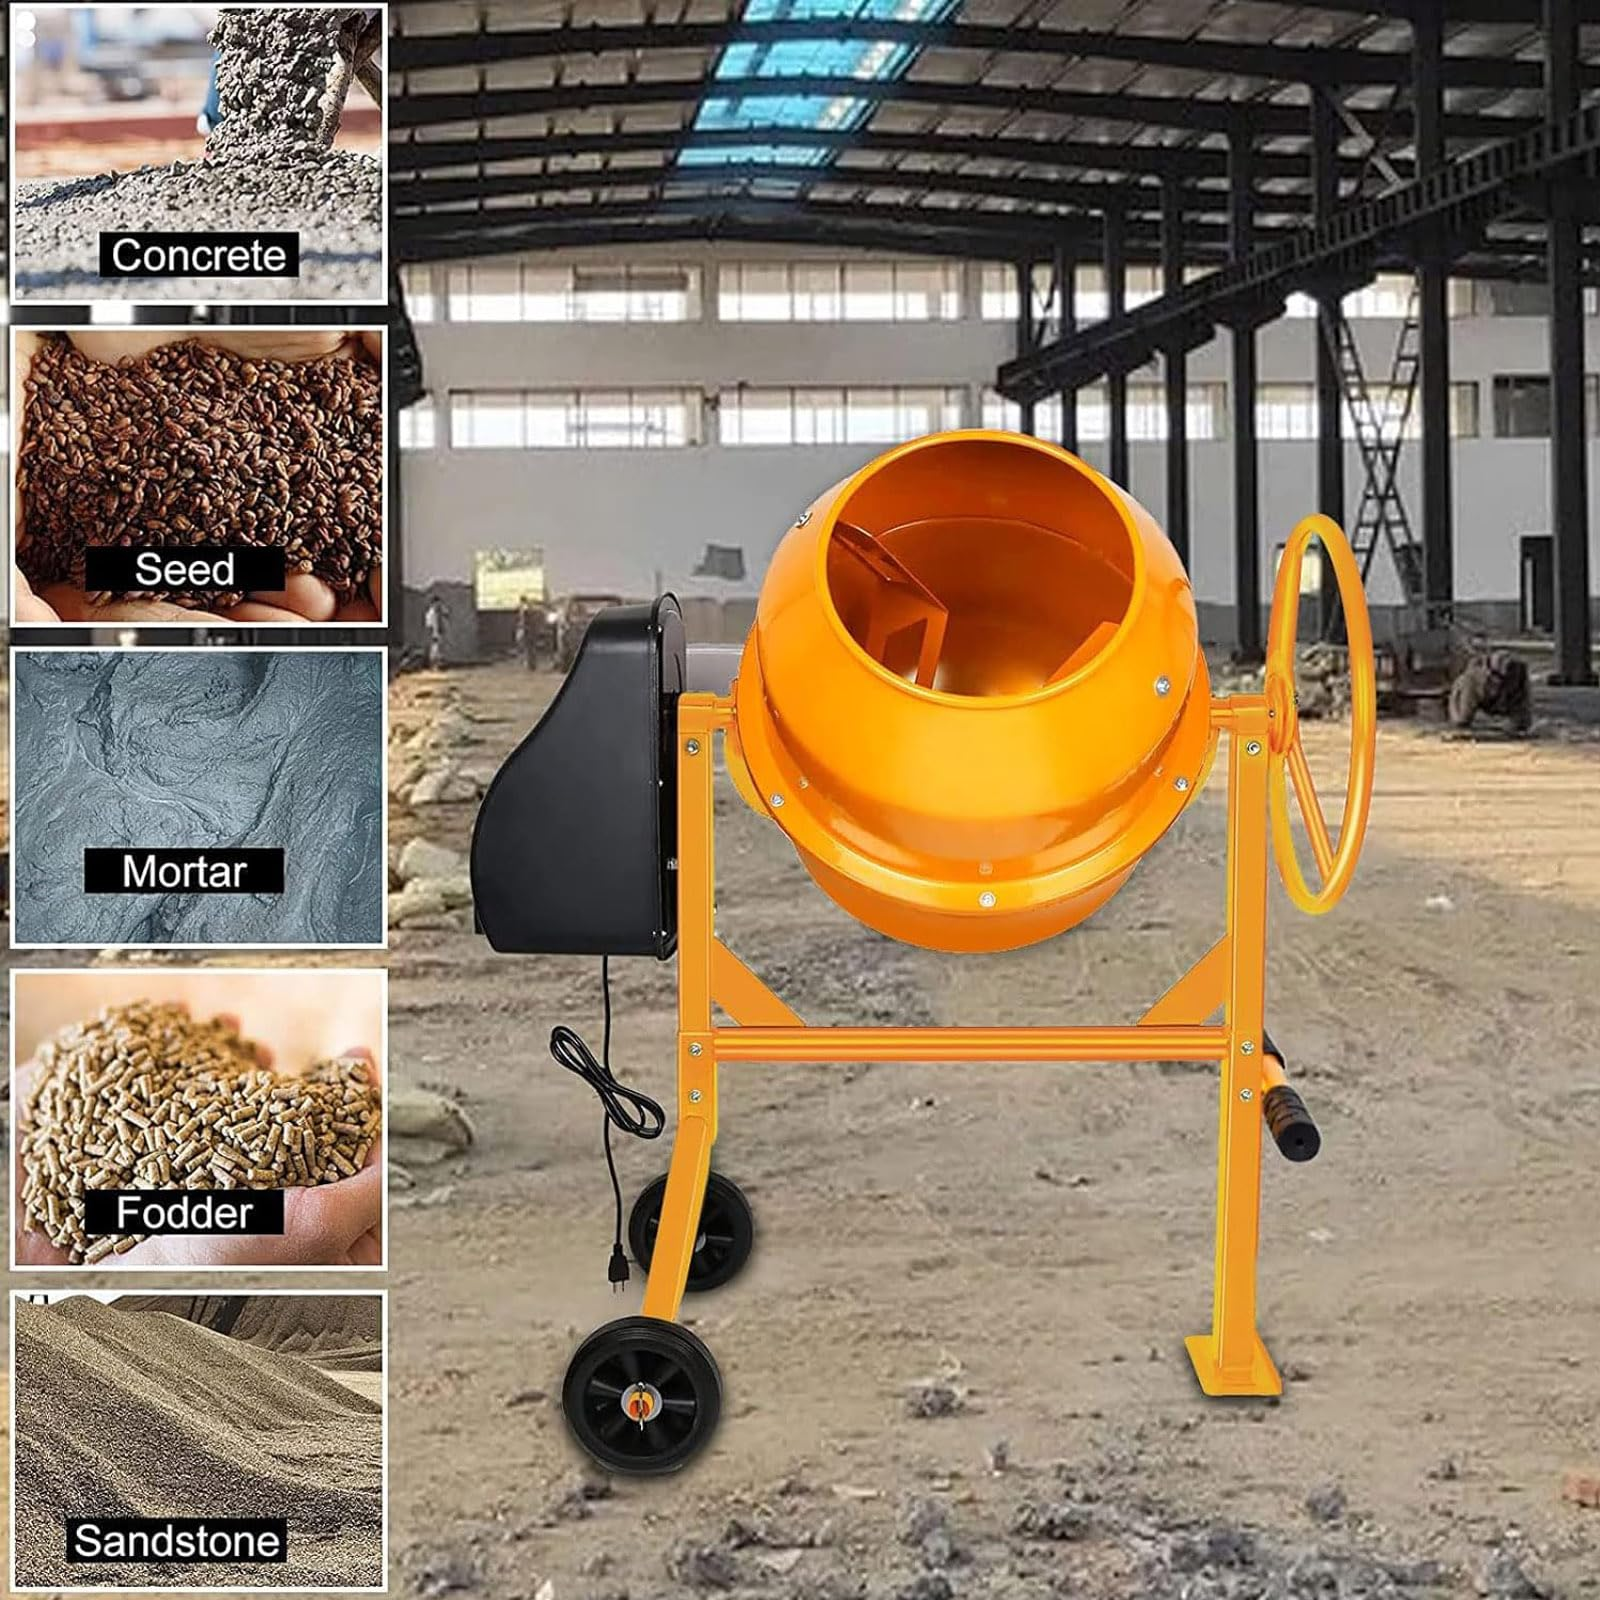 An innovative cement mixer with automated features